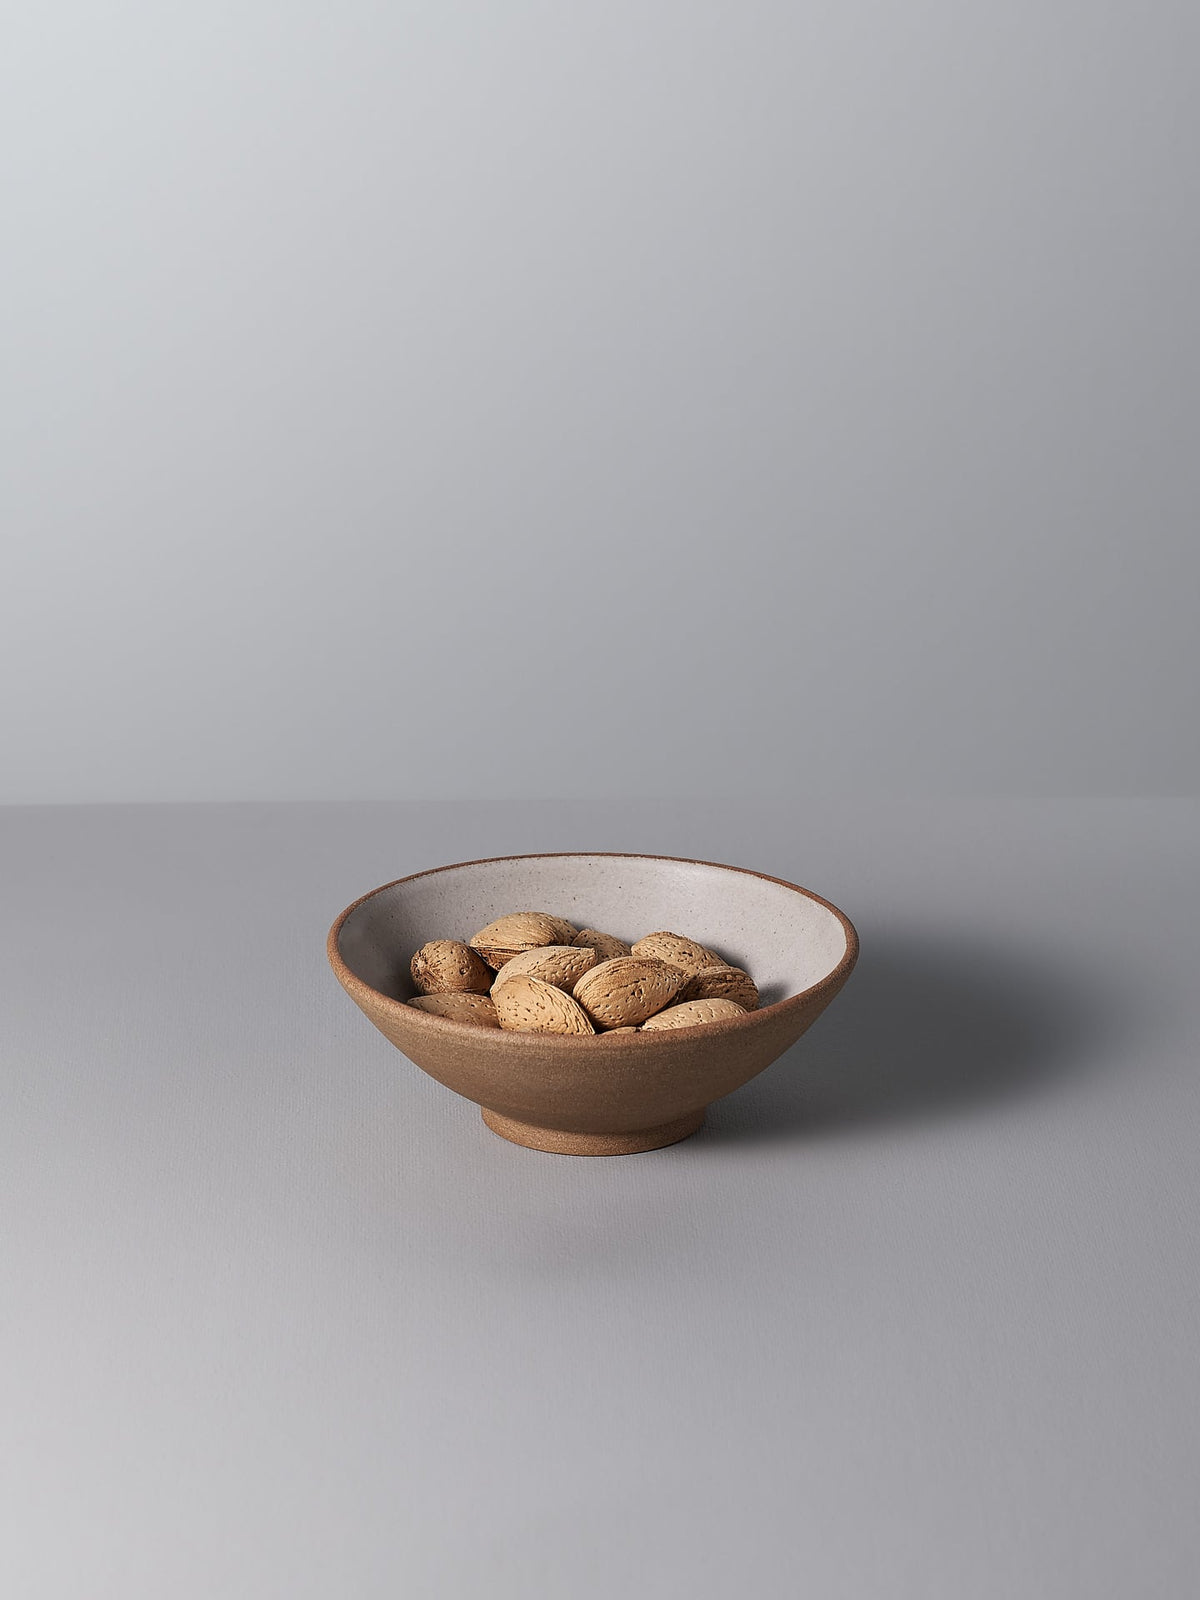 A Nicola Shuttleworth Condiment Bowl – Large filled with almonds on a grey surface.